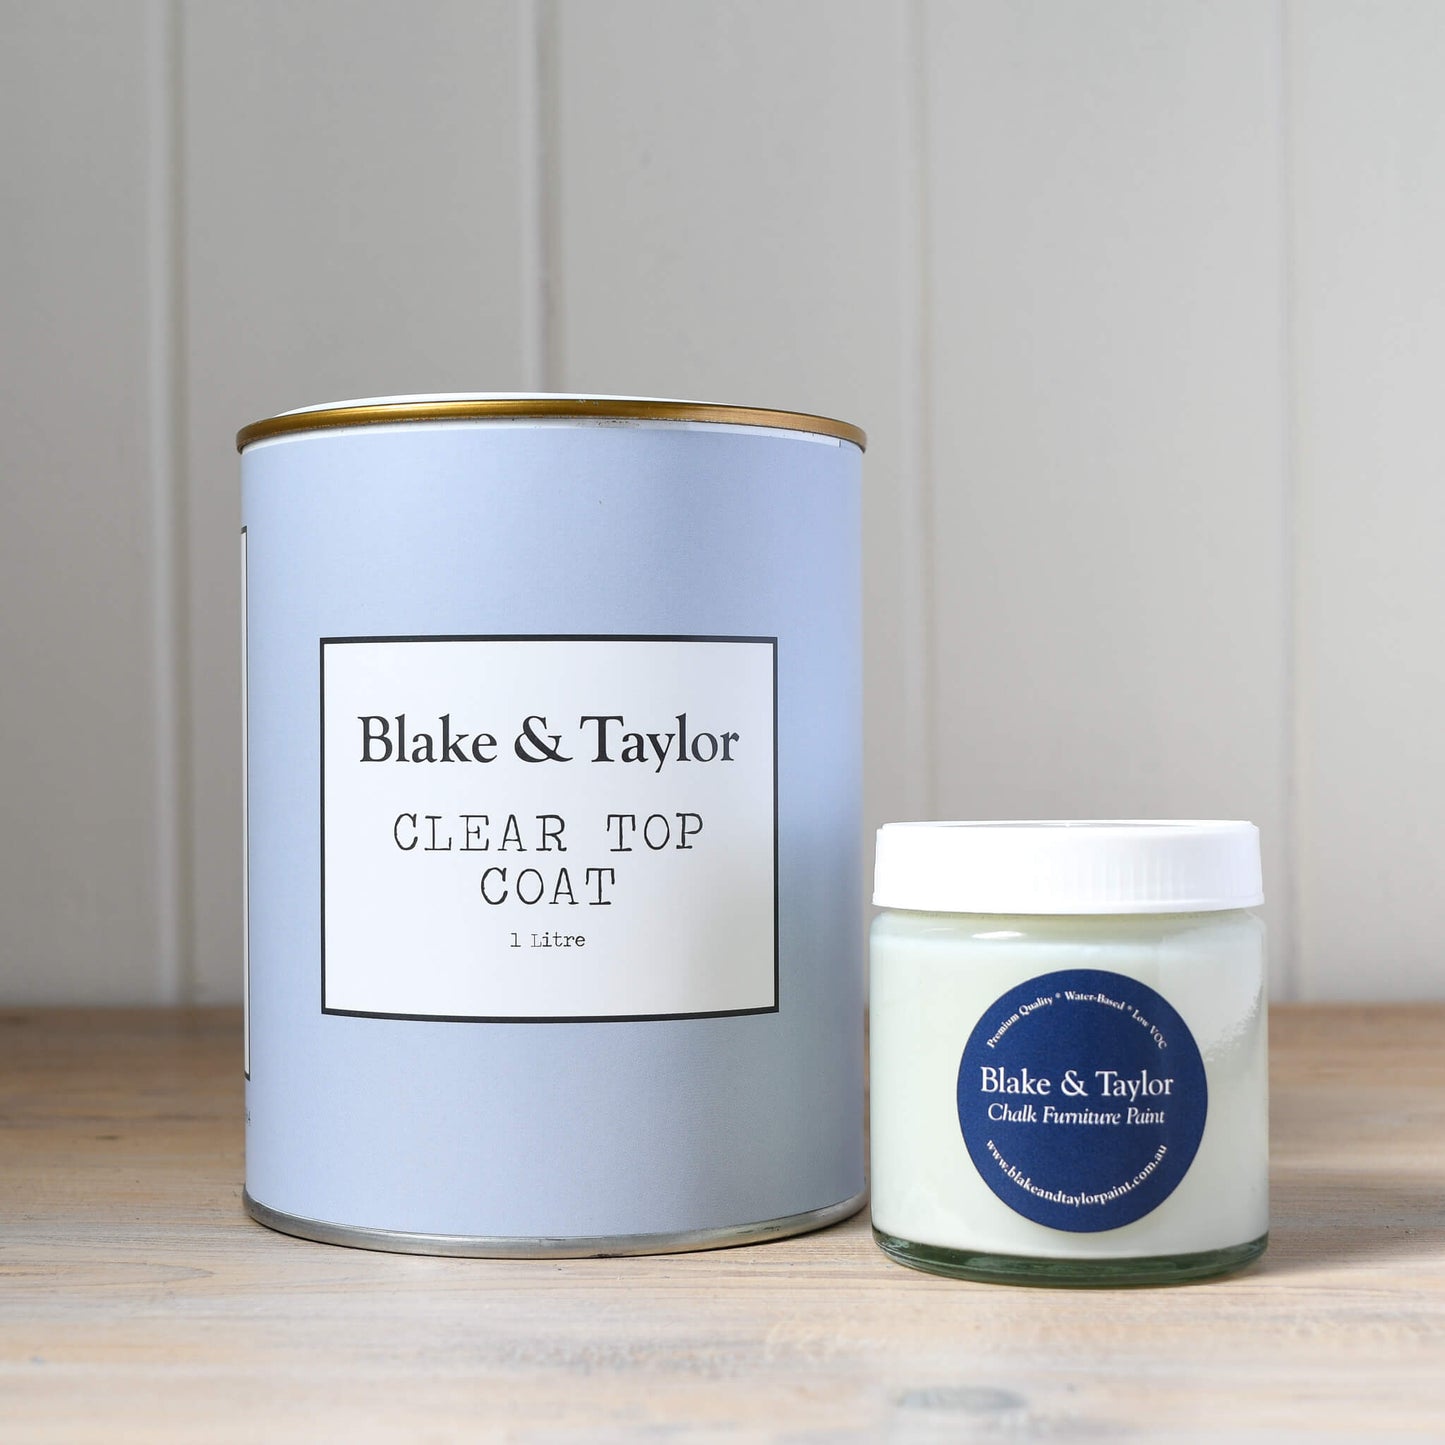 Blake & Taylor Chalk Furniture Paint 1 litre and 120ml pot of Clear Top Coat 